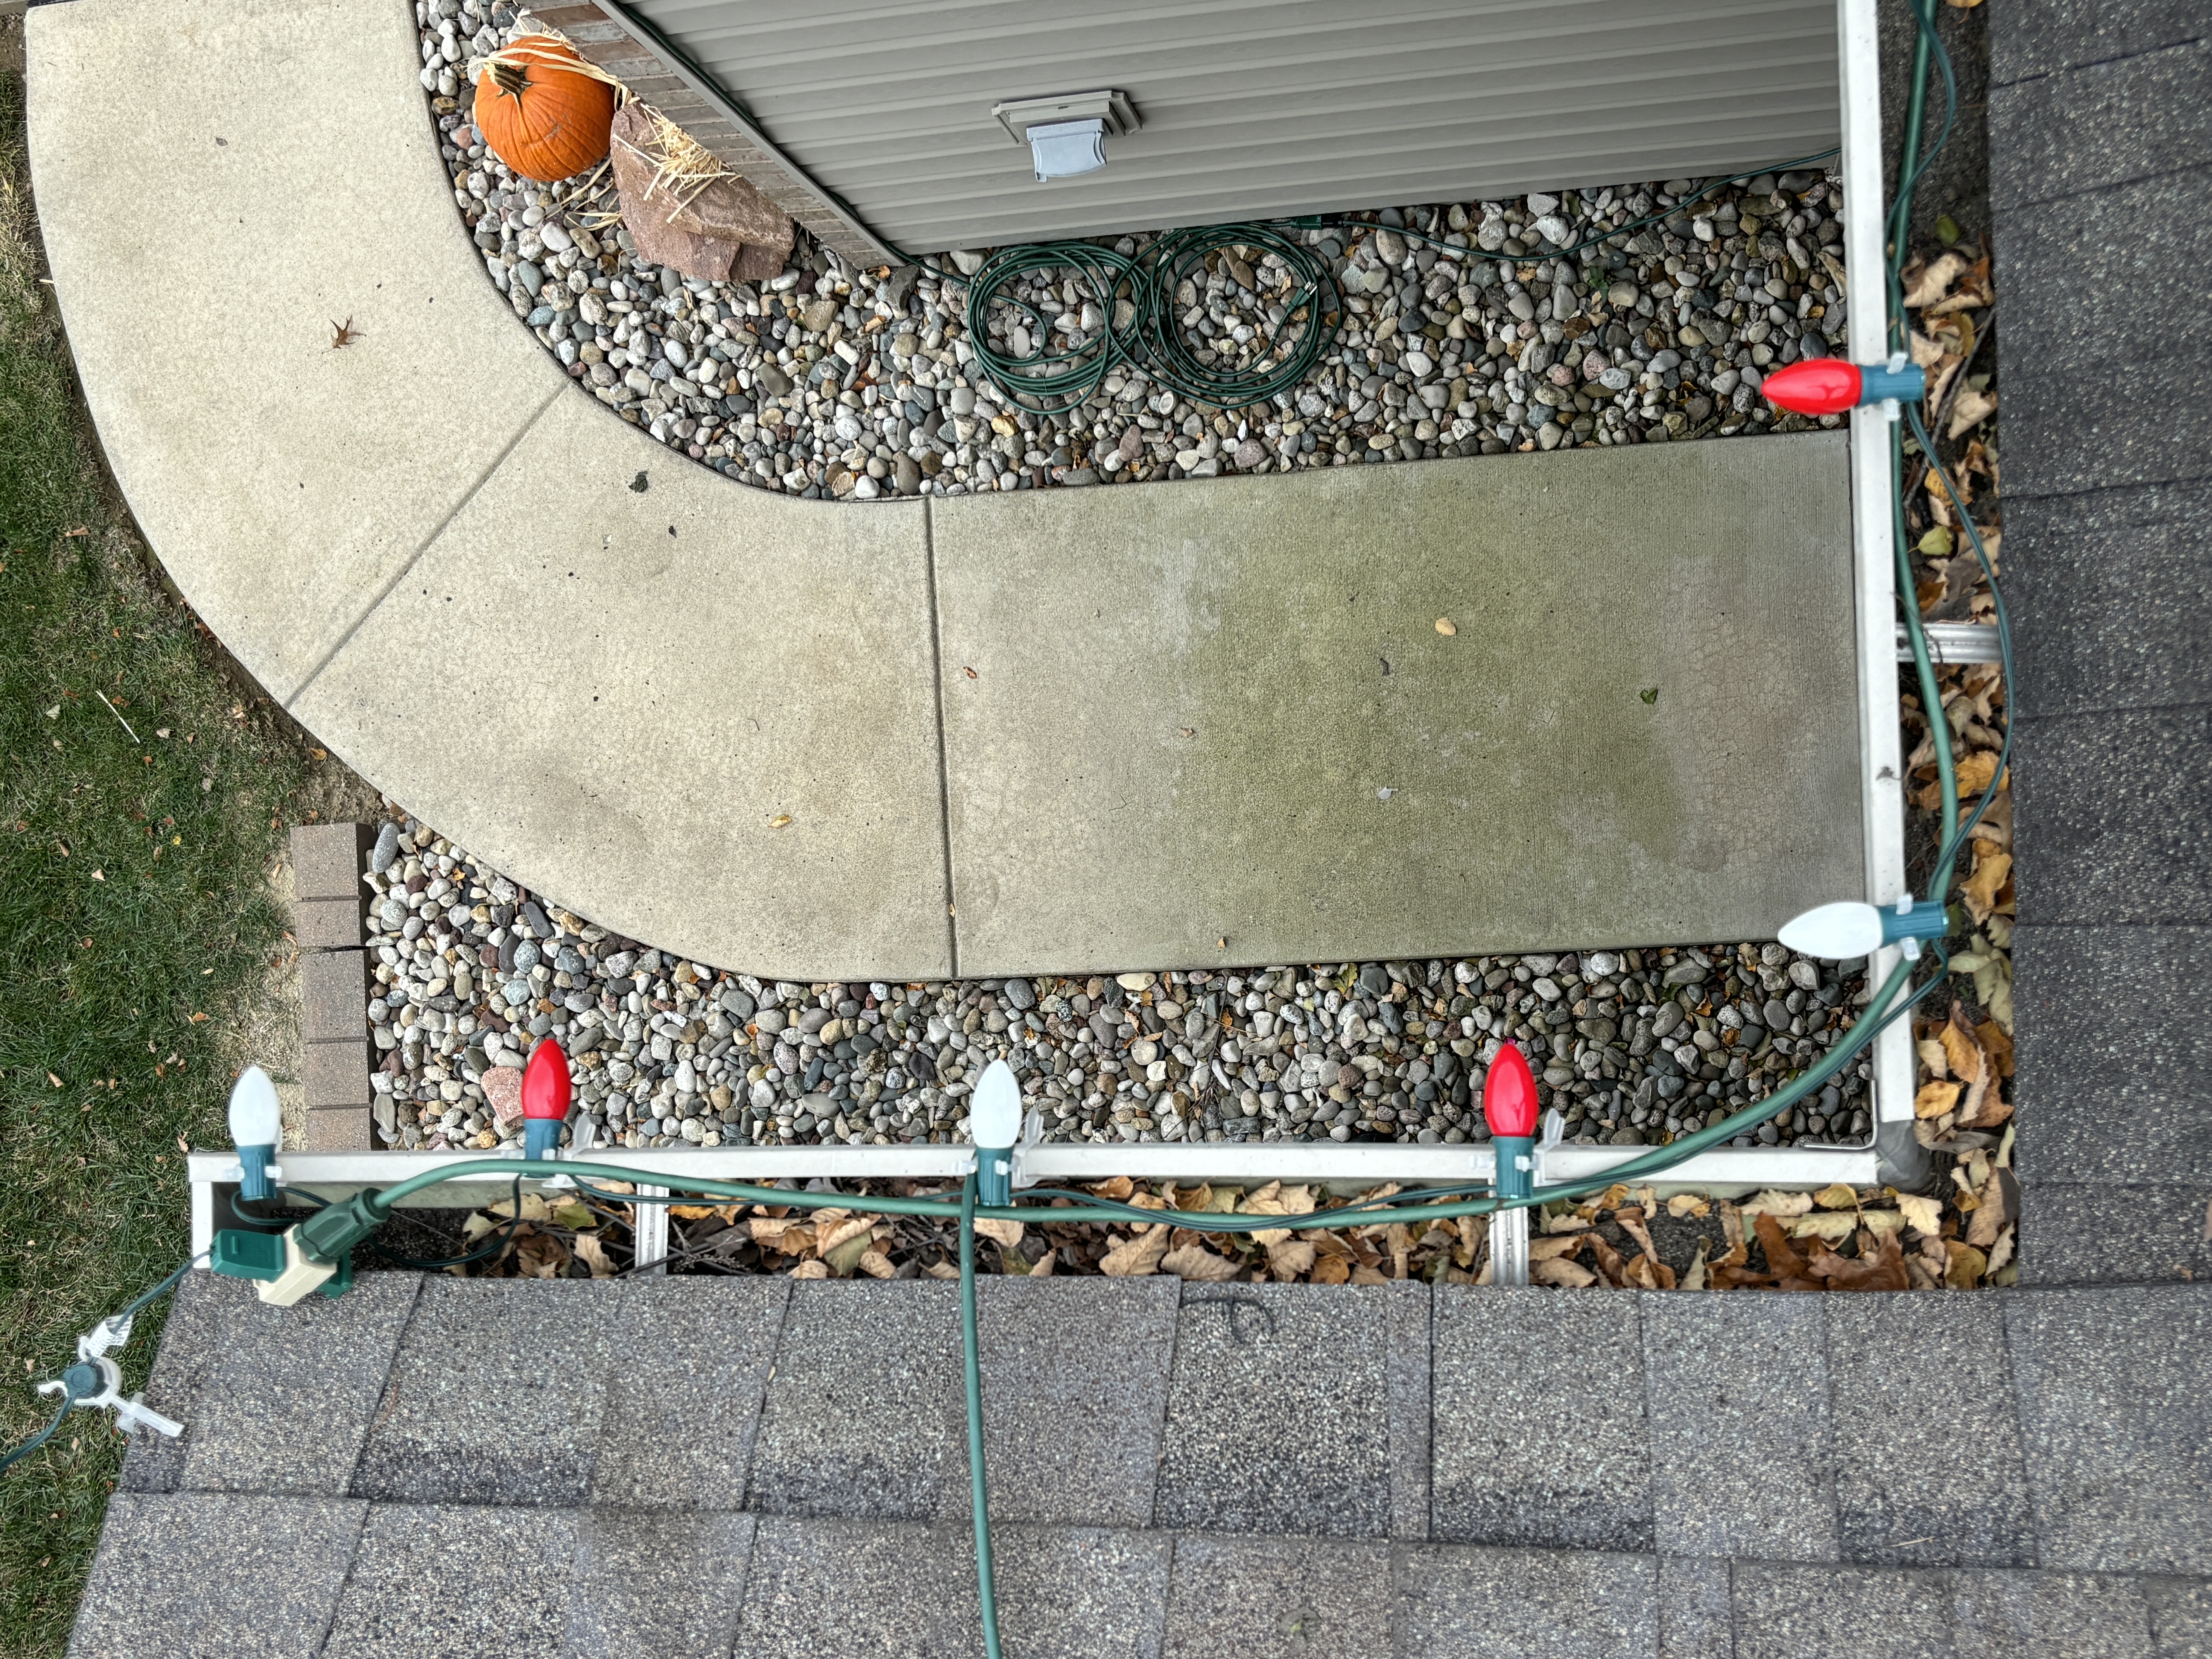 Gutter cleaning in Redbud Illinois